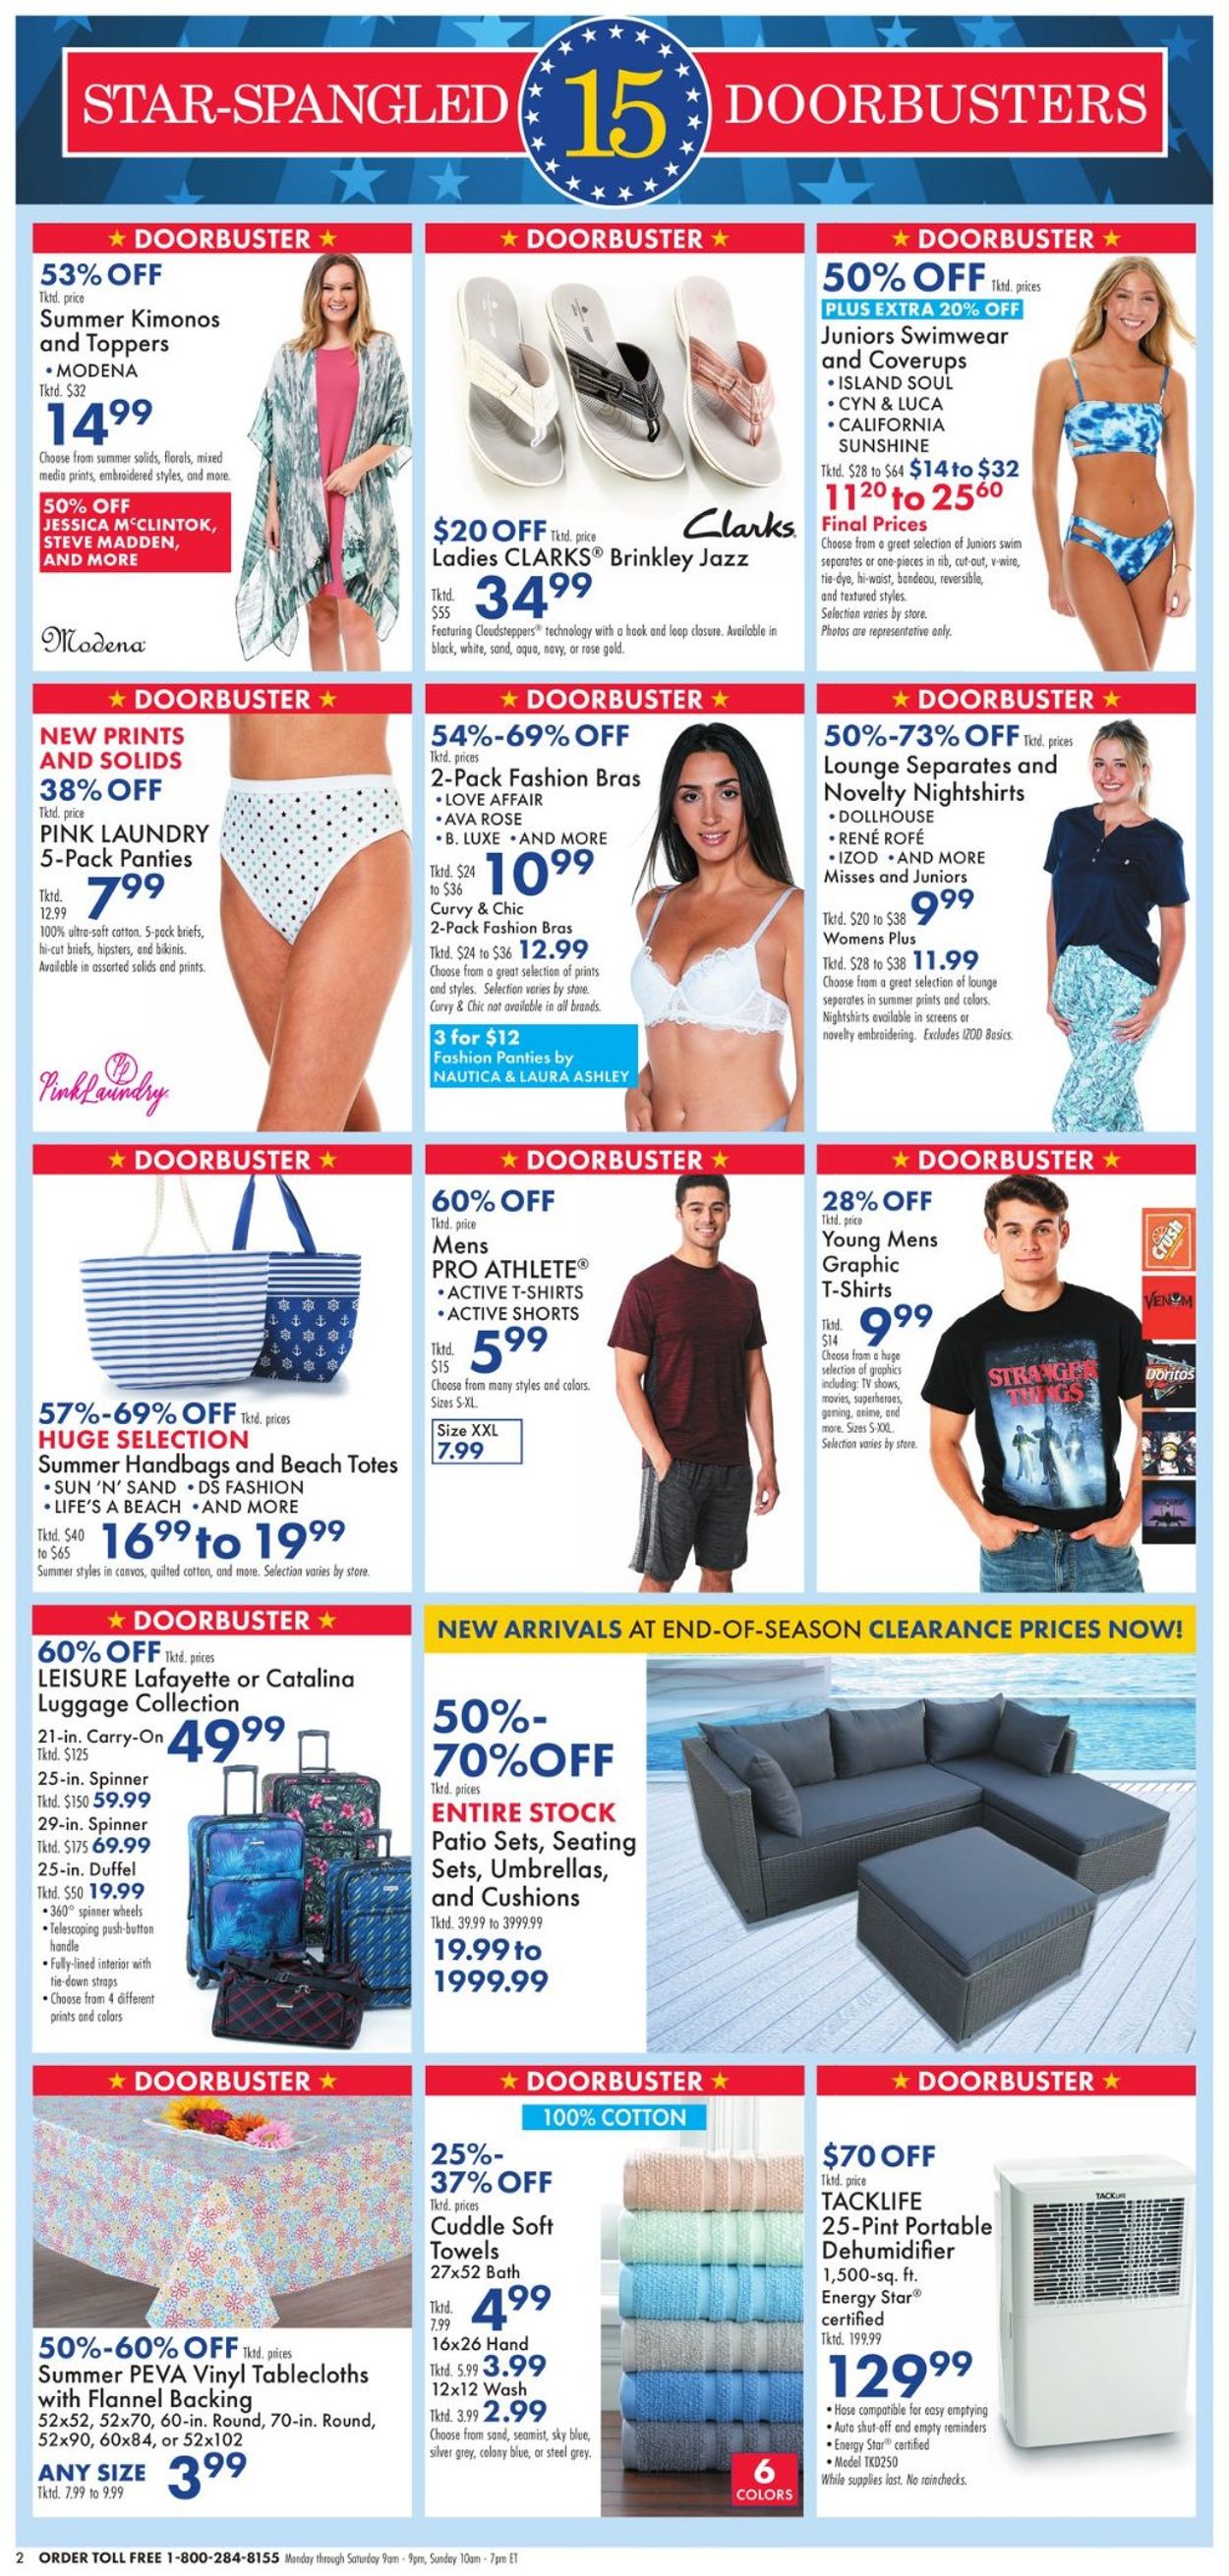 Catalogue Boscov's - 4th of July Sale from 06/30/2022